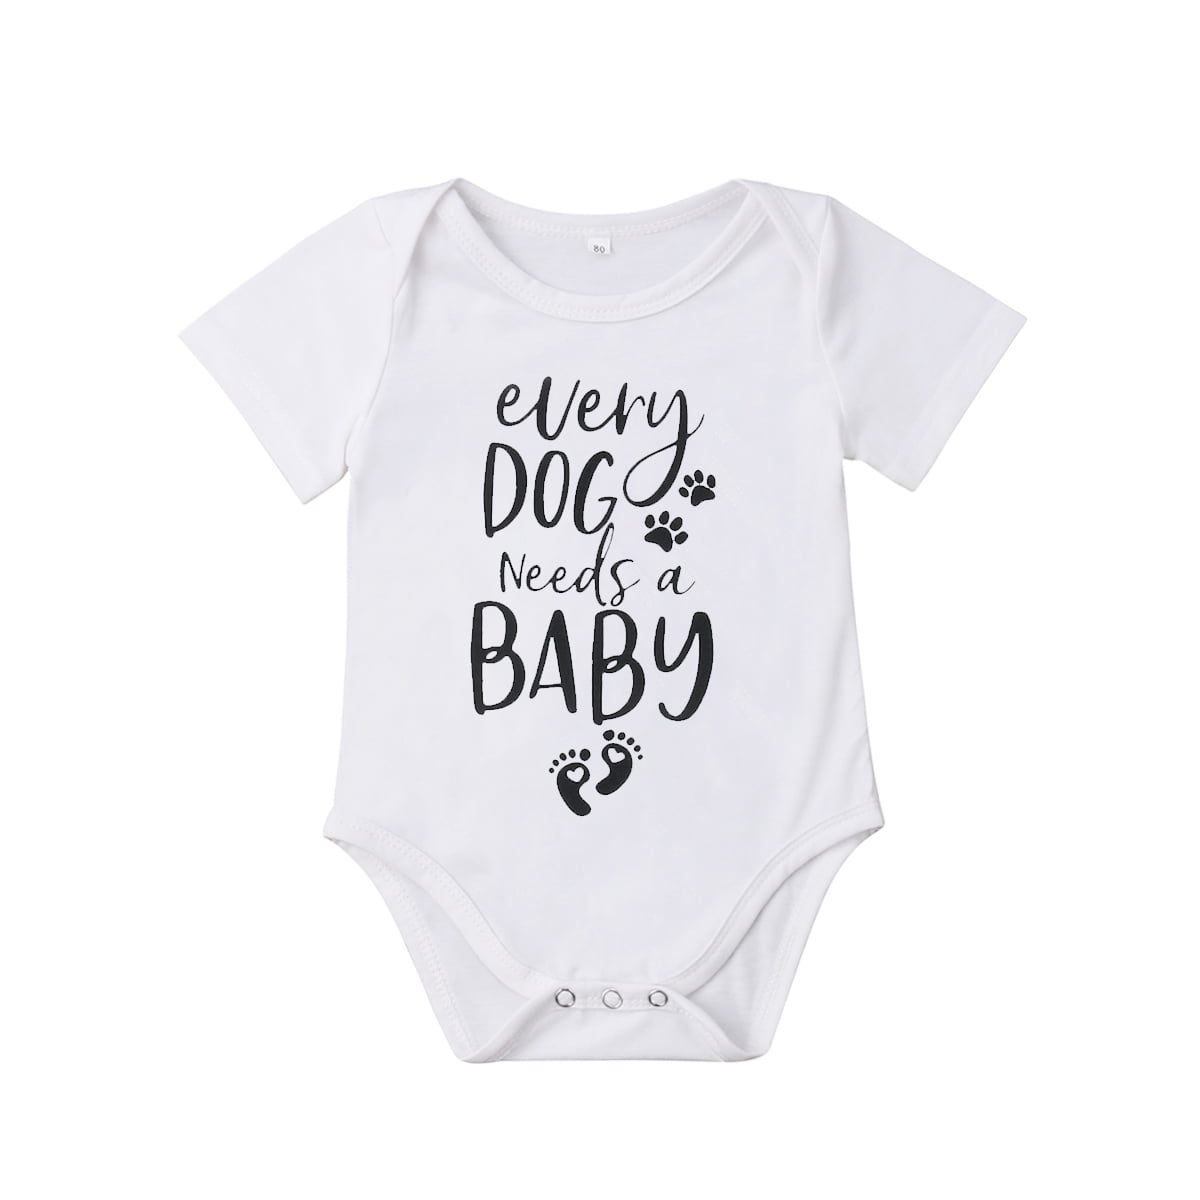 Will You Be My Godparents Short Sleeve Baby Shower Gift Vest Baby Grows 0-18M 